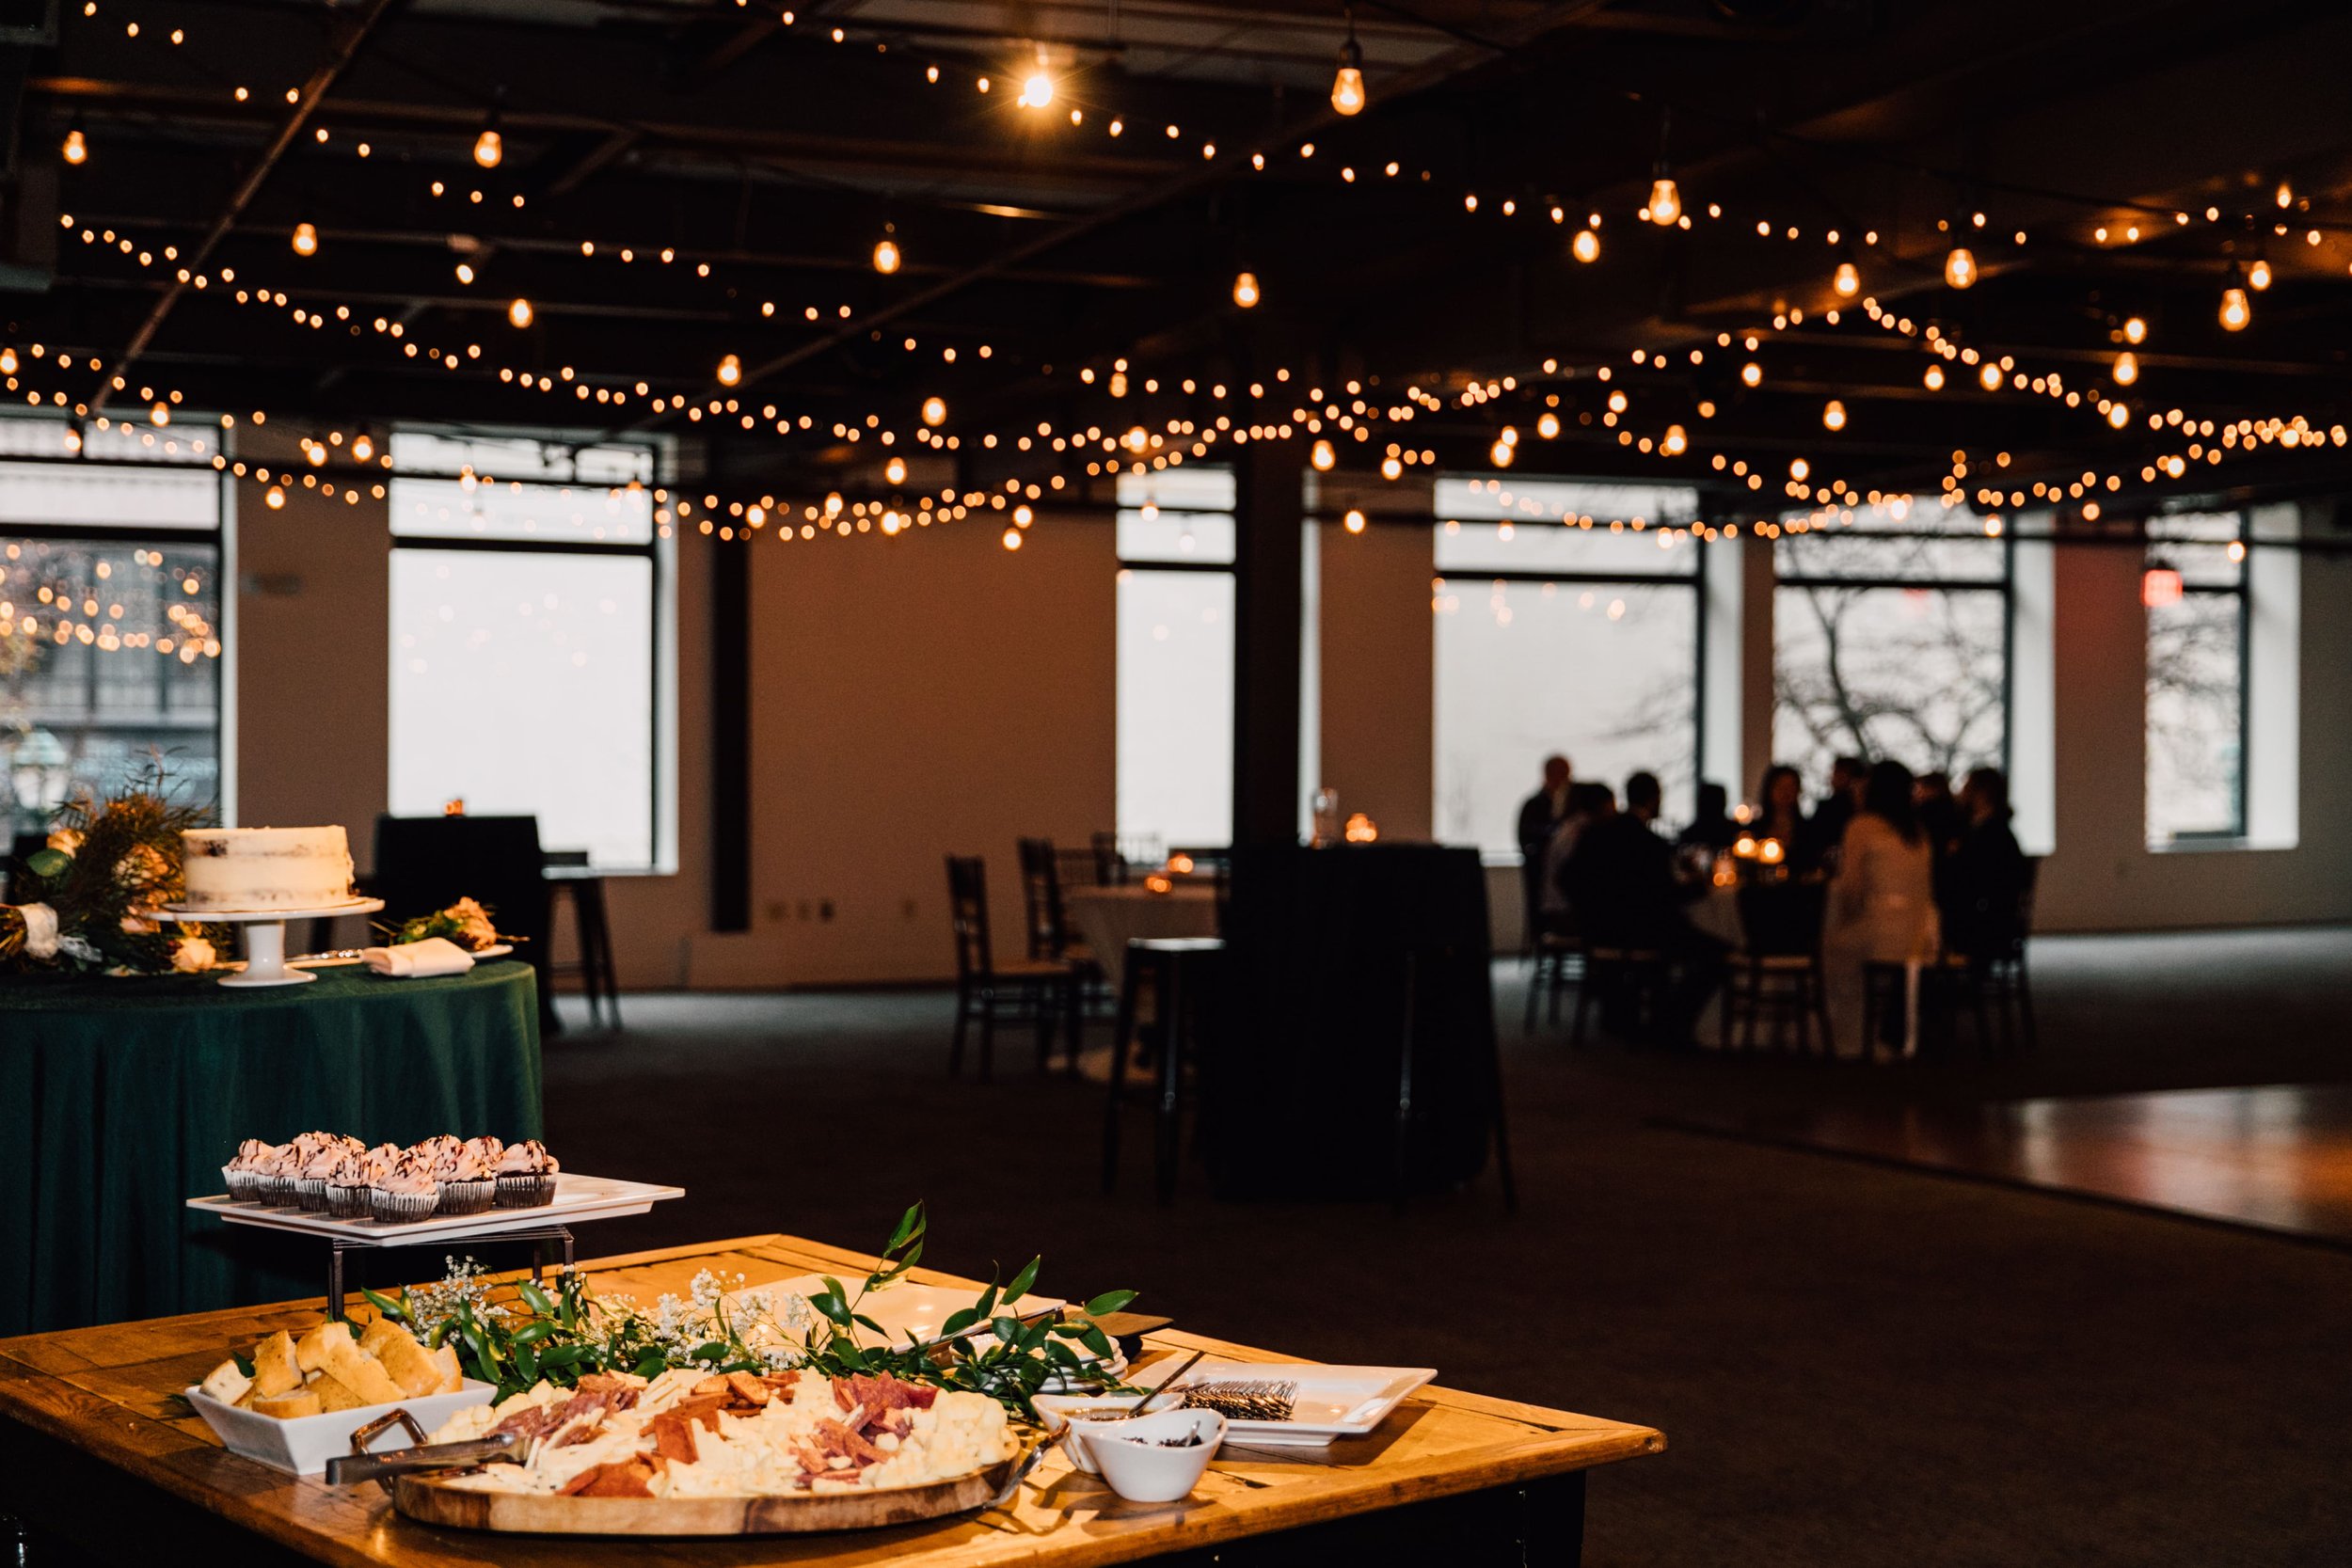  a photo from behind the food table at a sky armory wedding while guest silhouettes mingle in the background with string lights gleaming out of focus above them  